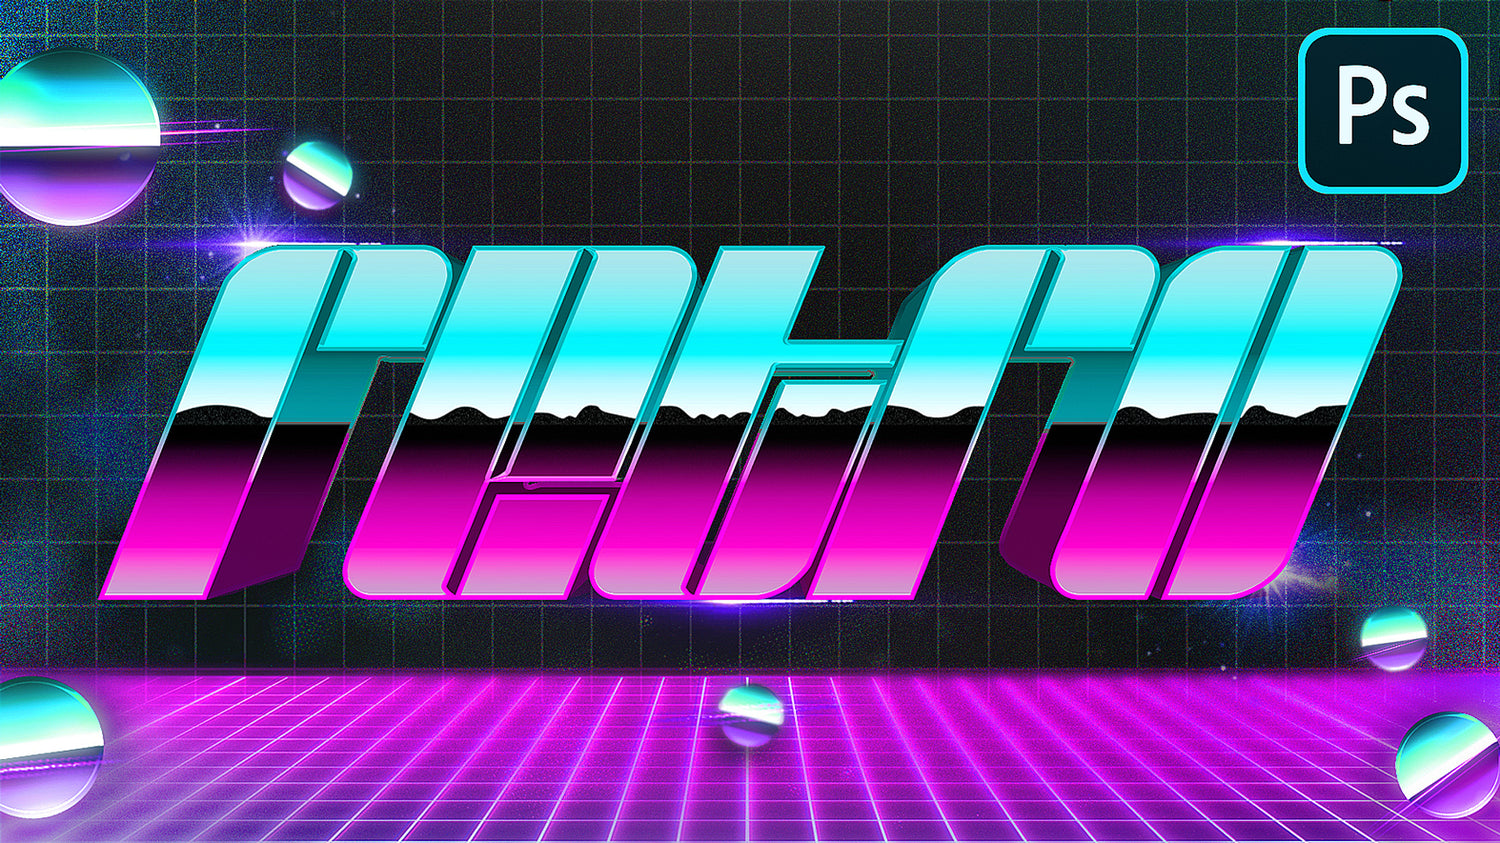 RETRO 80's Chrome Text Effect in Photoshop!